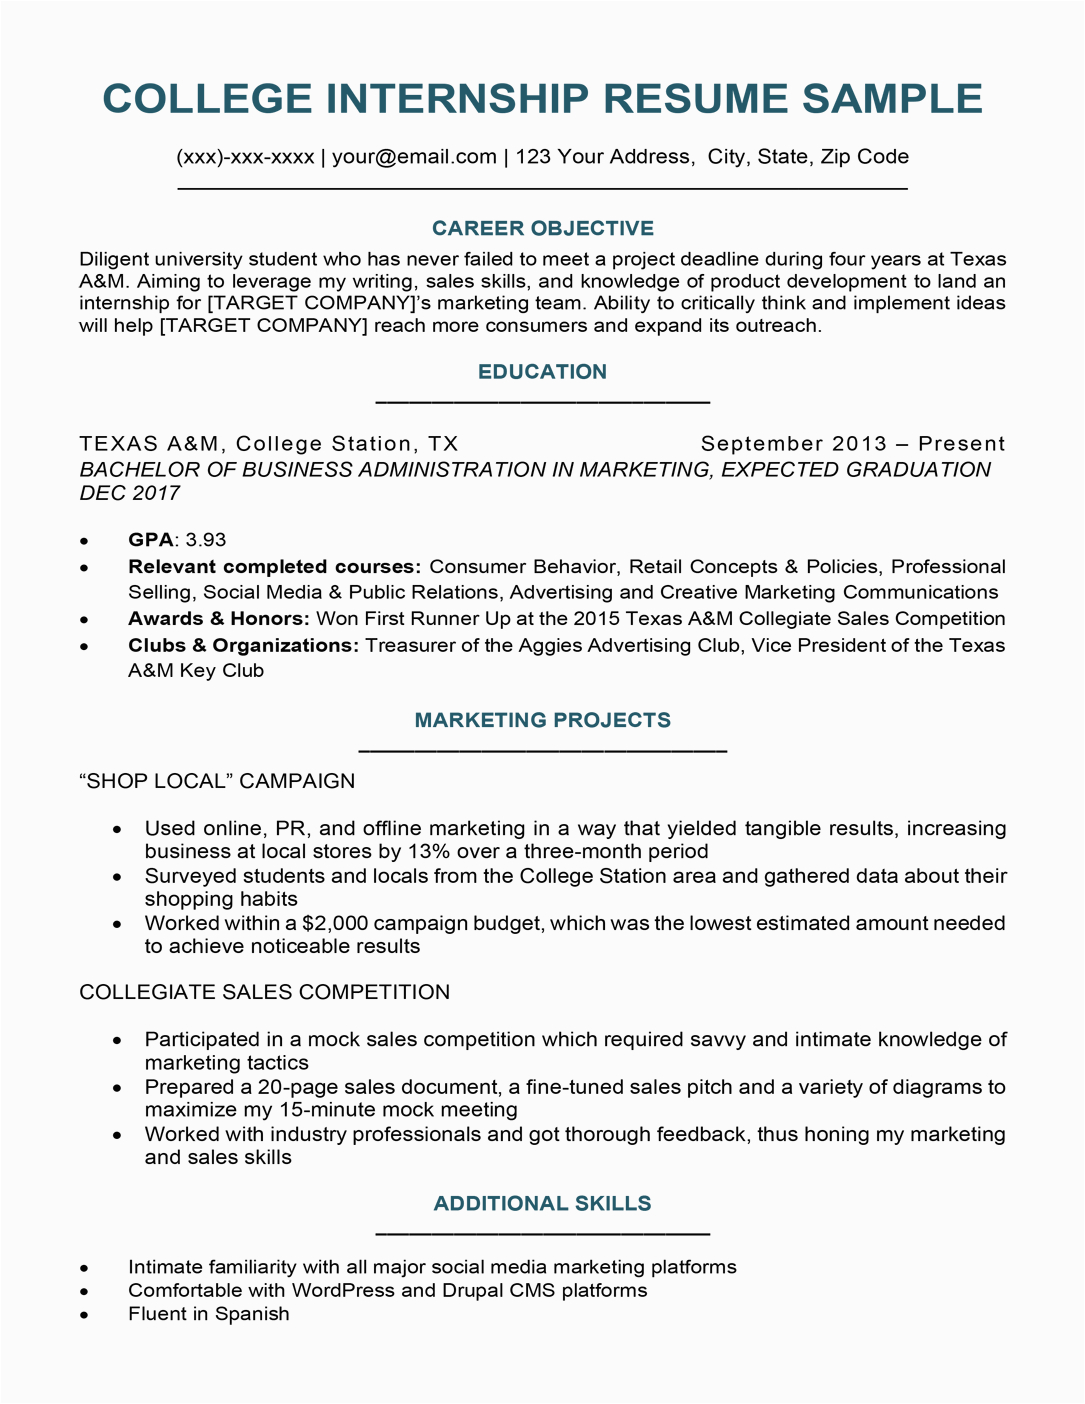 Sample Resume for College Student for Internship College Student Resume Sample & Writing Tips